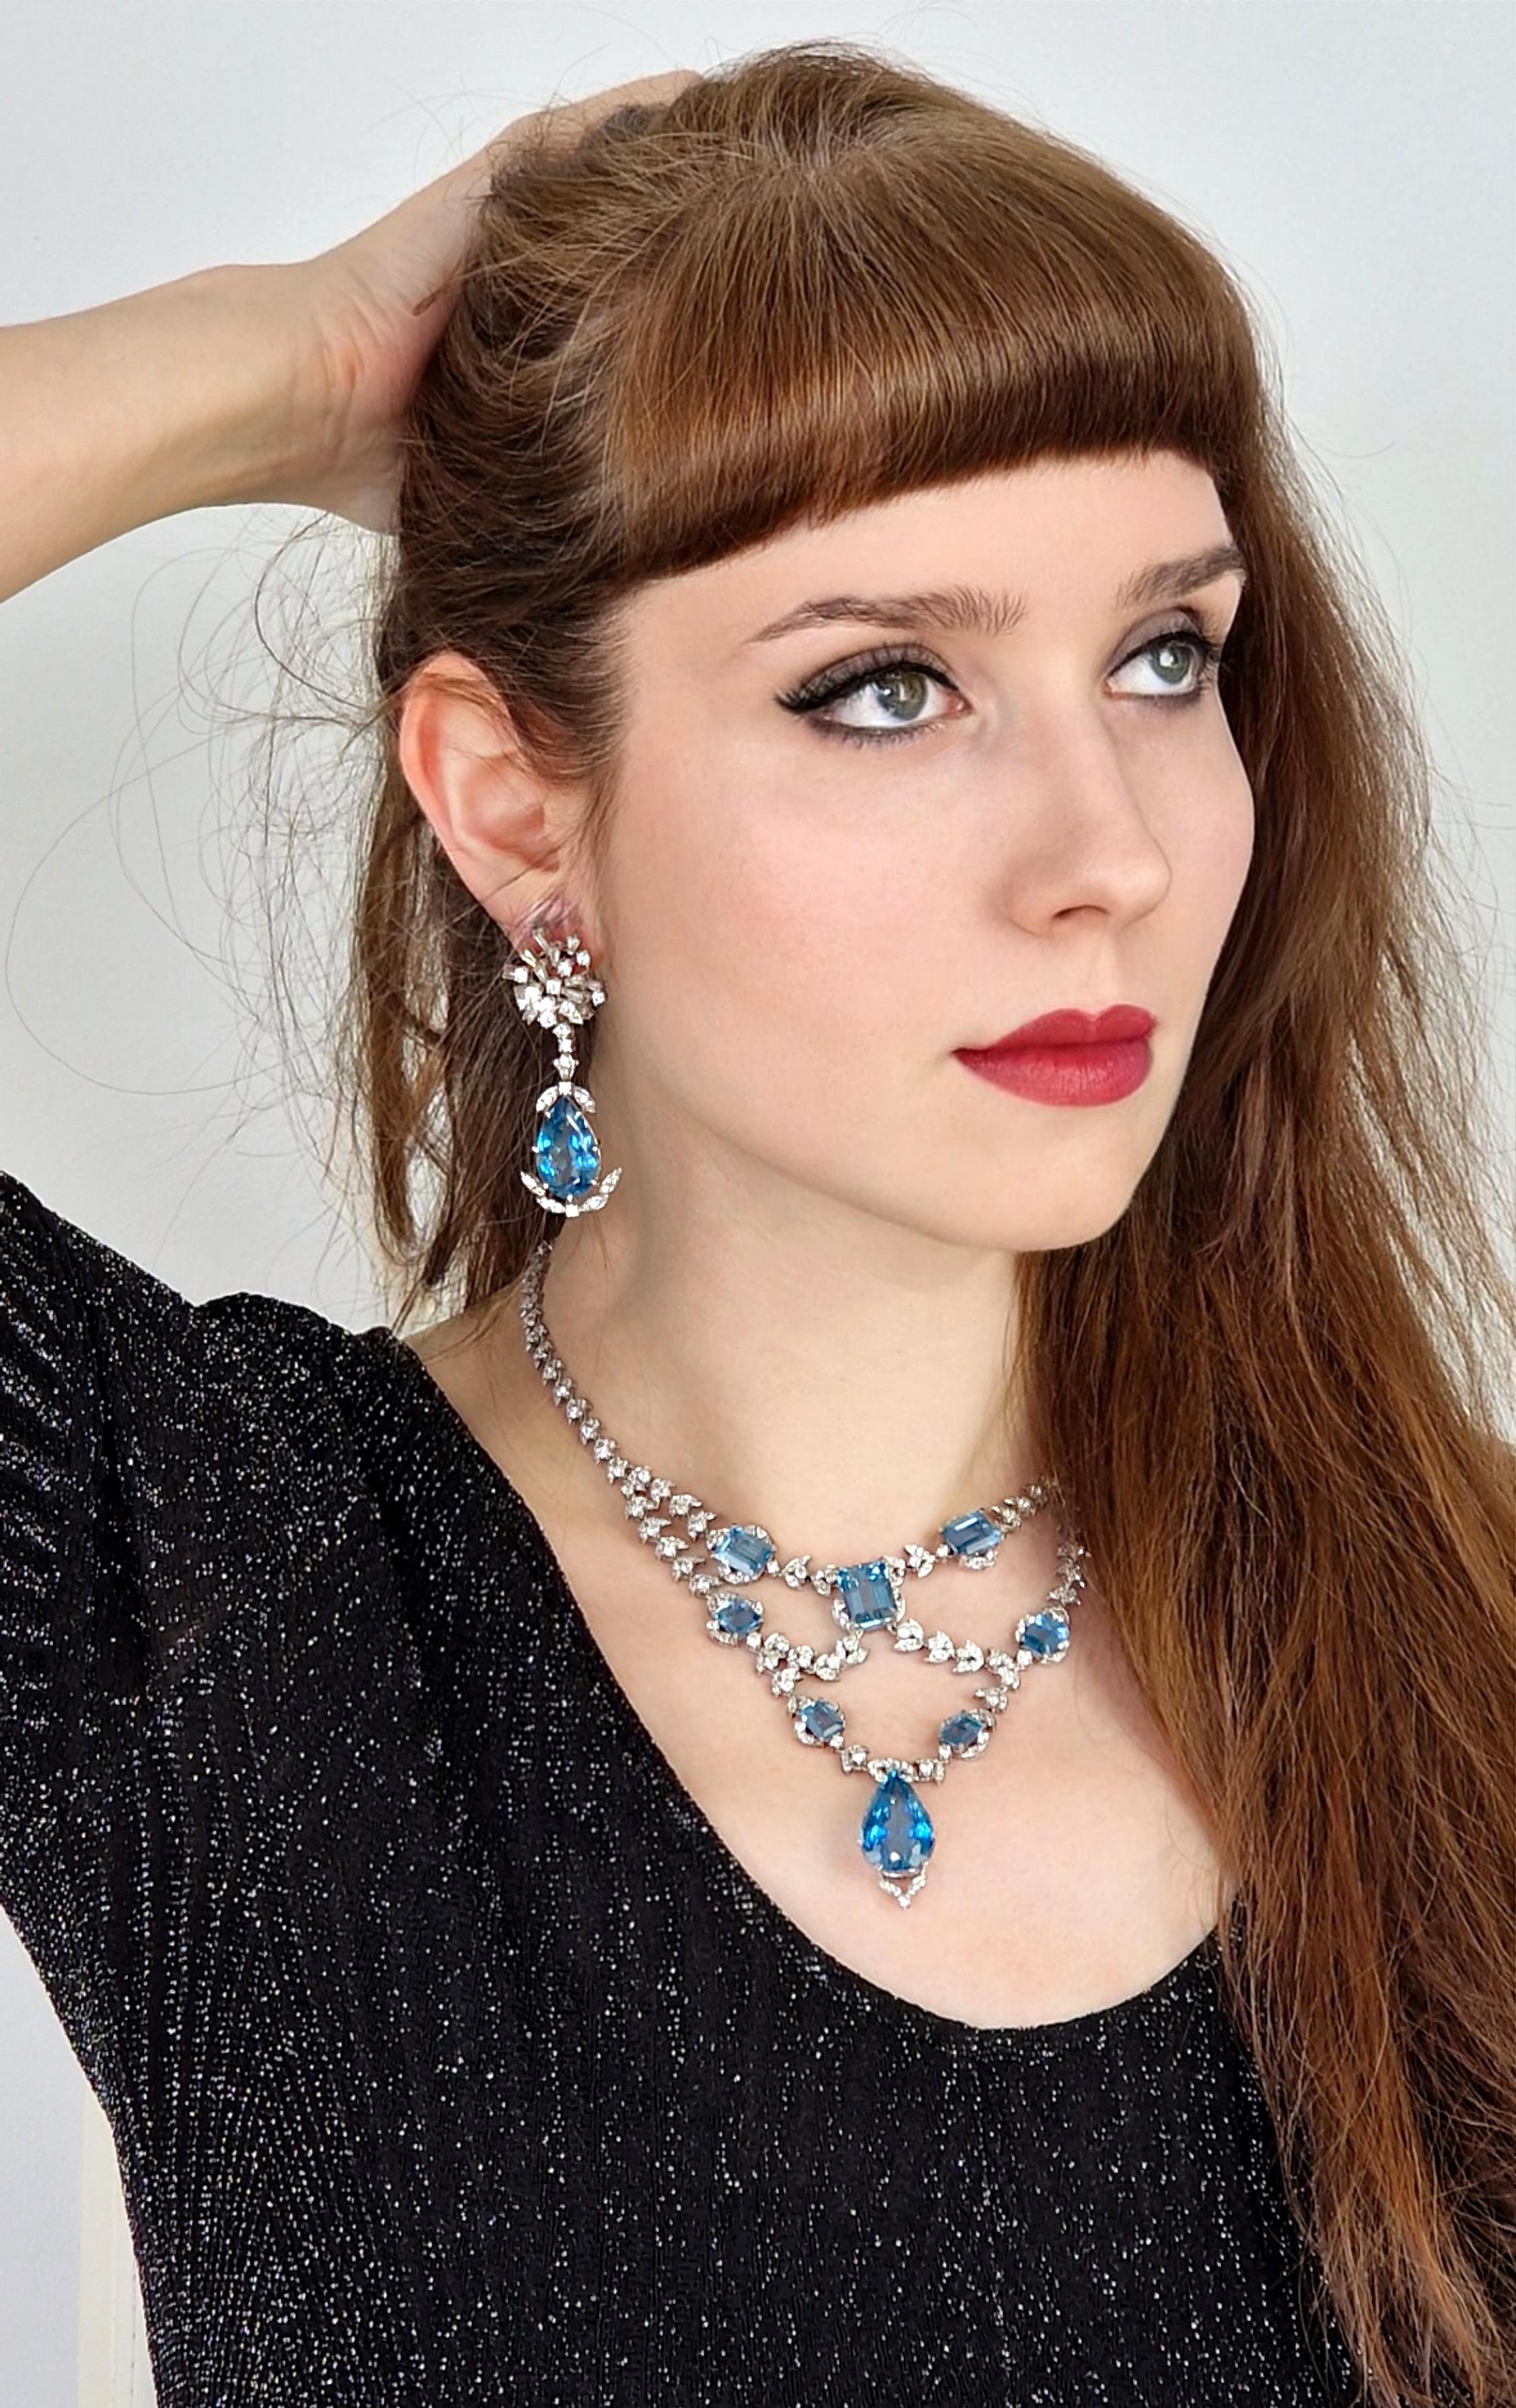 A classic and absolutely stunning piece, this is a one-of-a-kind necklace and earrings suite featuring immaculately matched dark blue emerald cut aquamarines mounted on delicate swallow wing motifs set with fine white brilliant diamonds. 